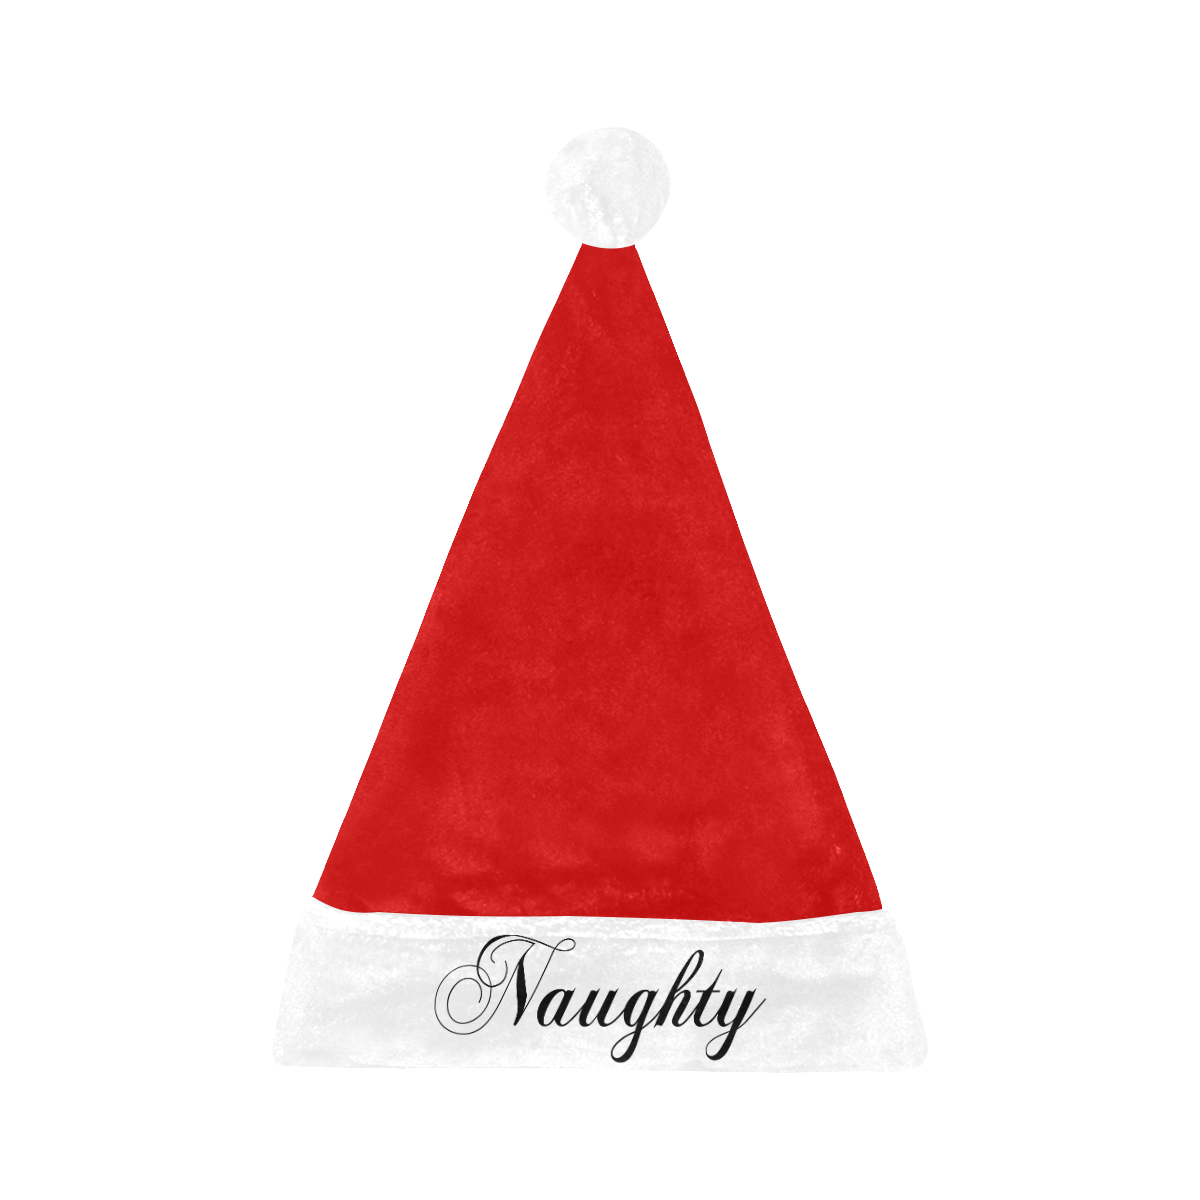 Christmas 'Naughty' (Red and White) Santa Hat